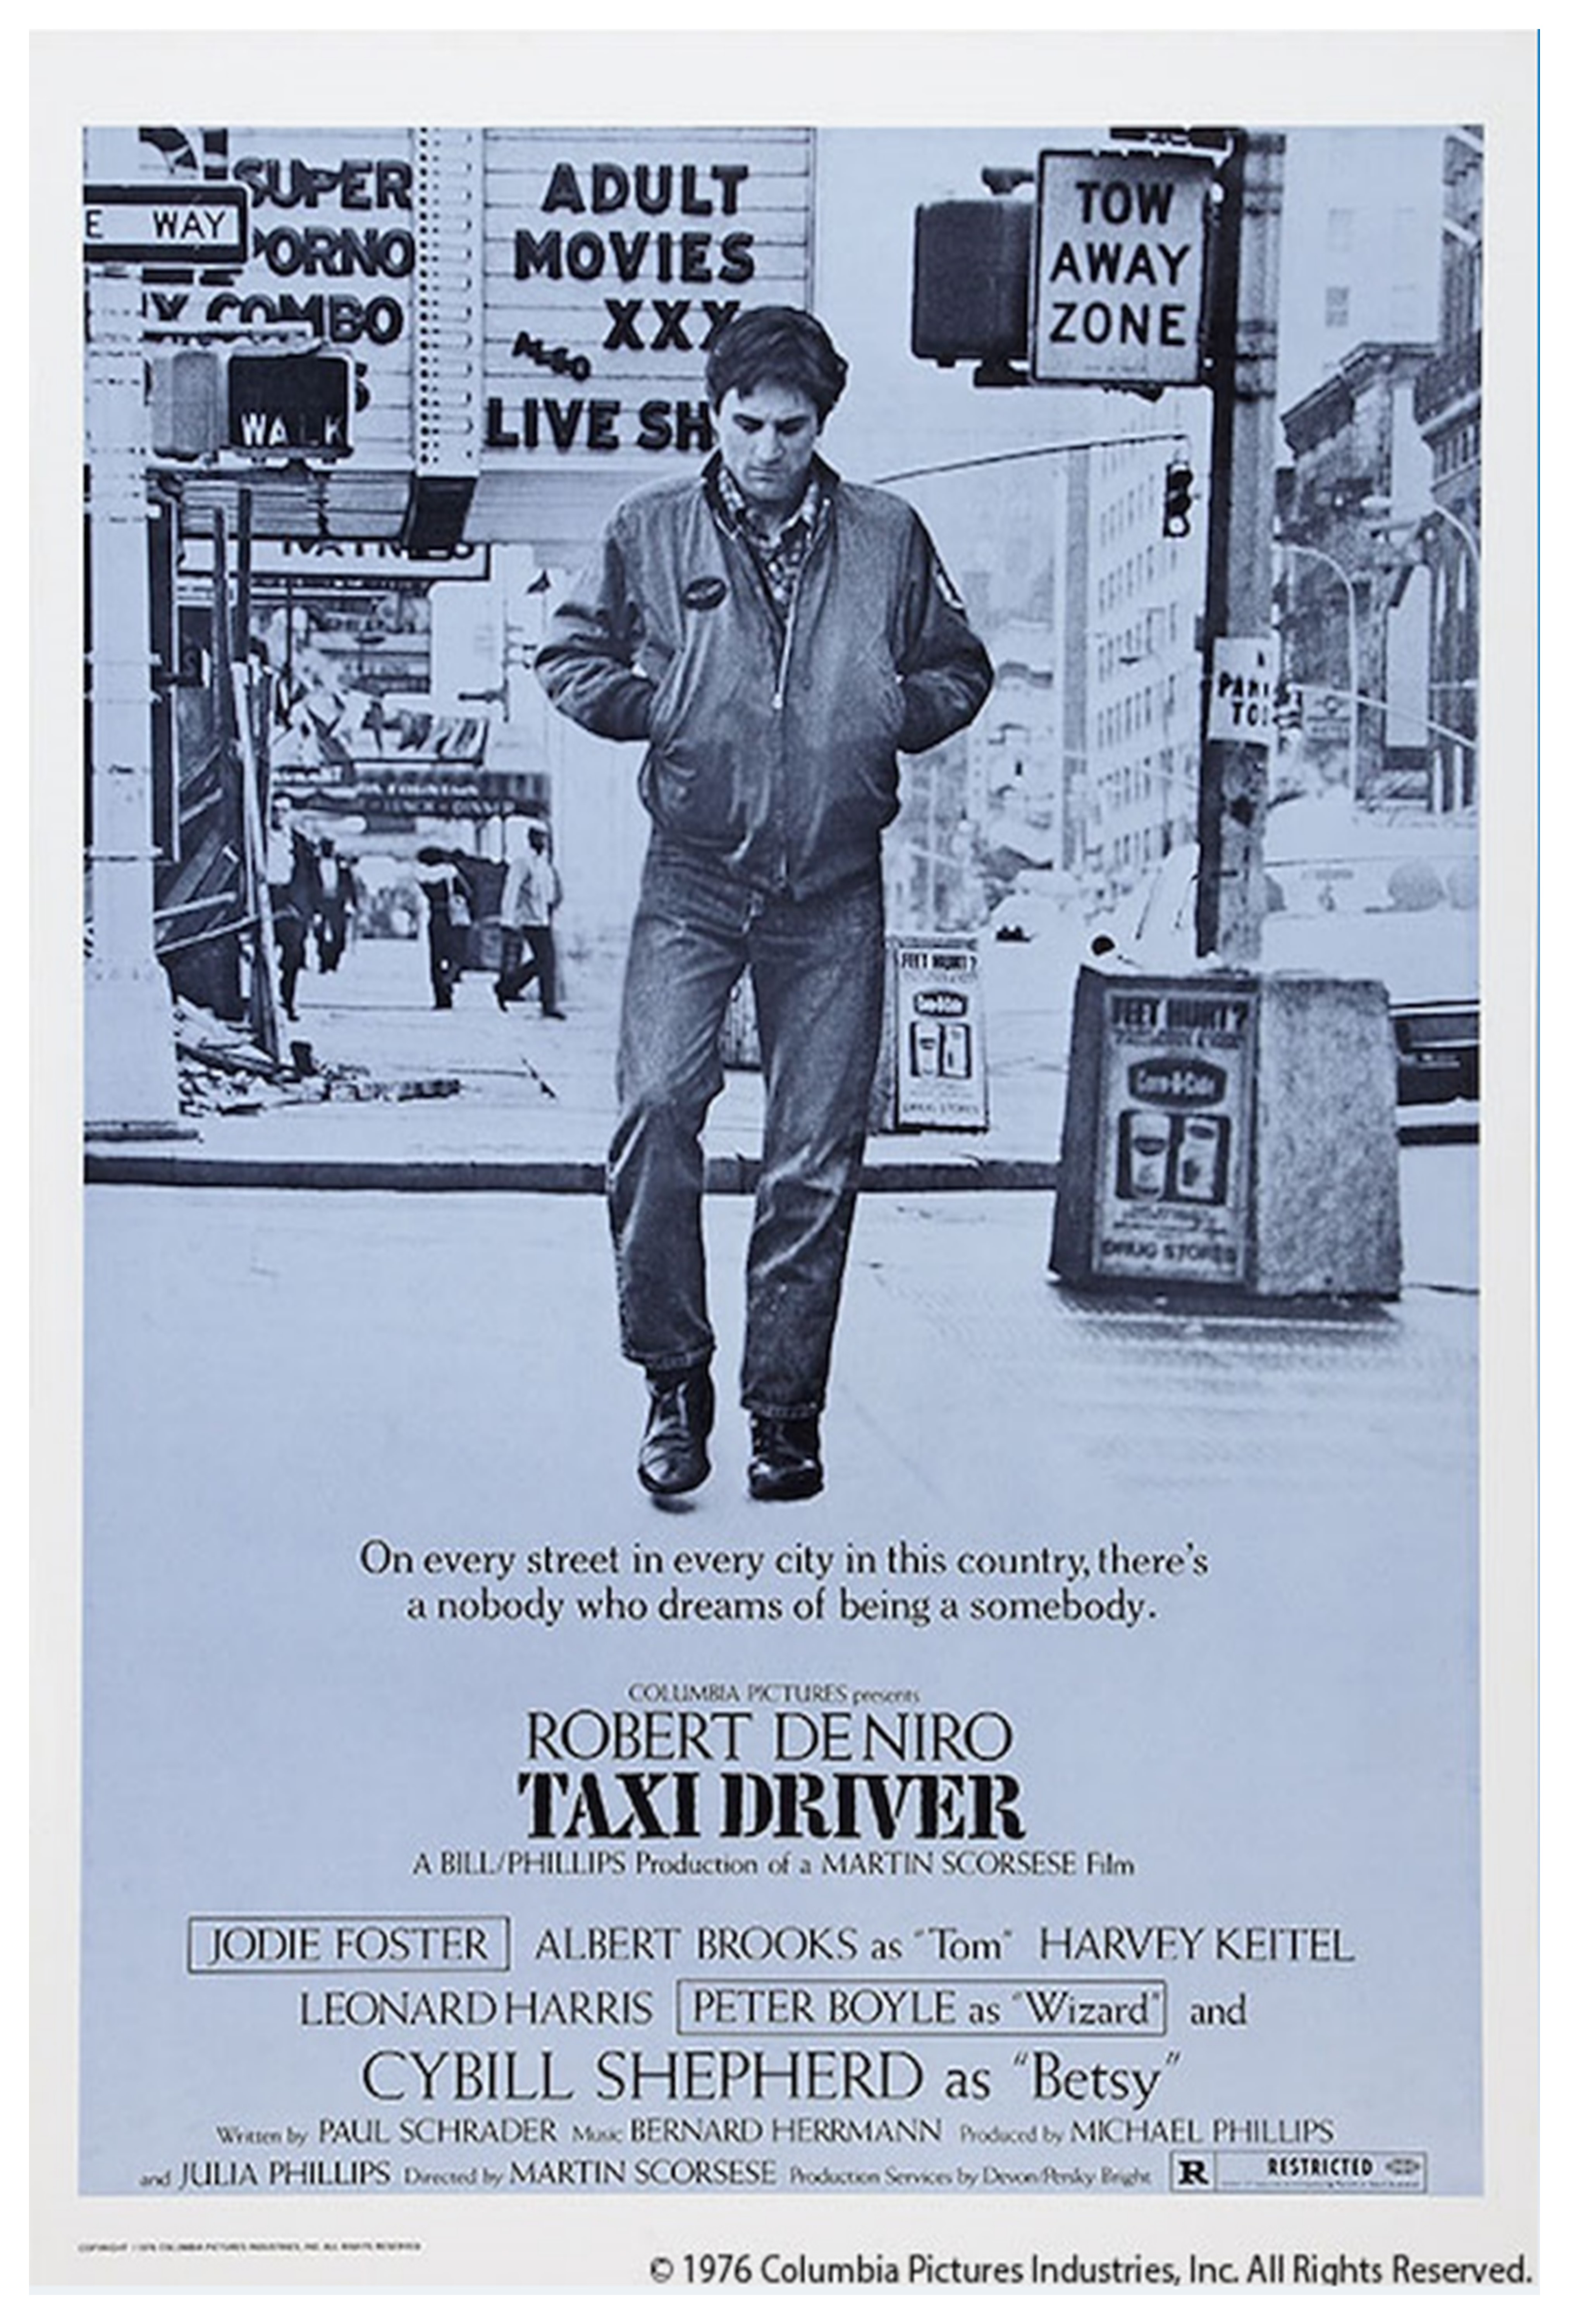 Film poster for Taxi Driver with black text on a blue-gray background featuring a man walking on a city street with his head down and hands in his pockets.